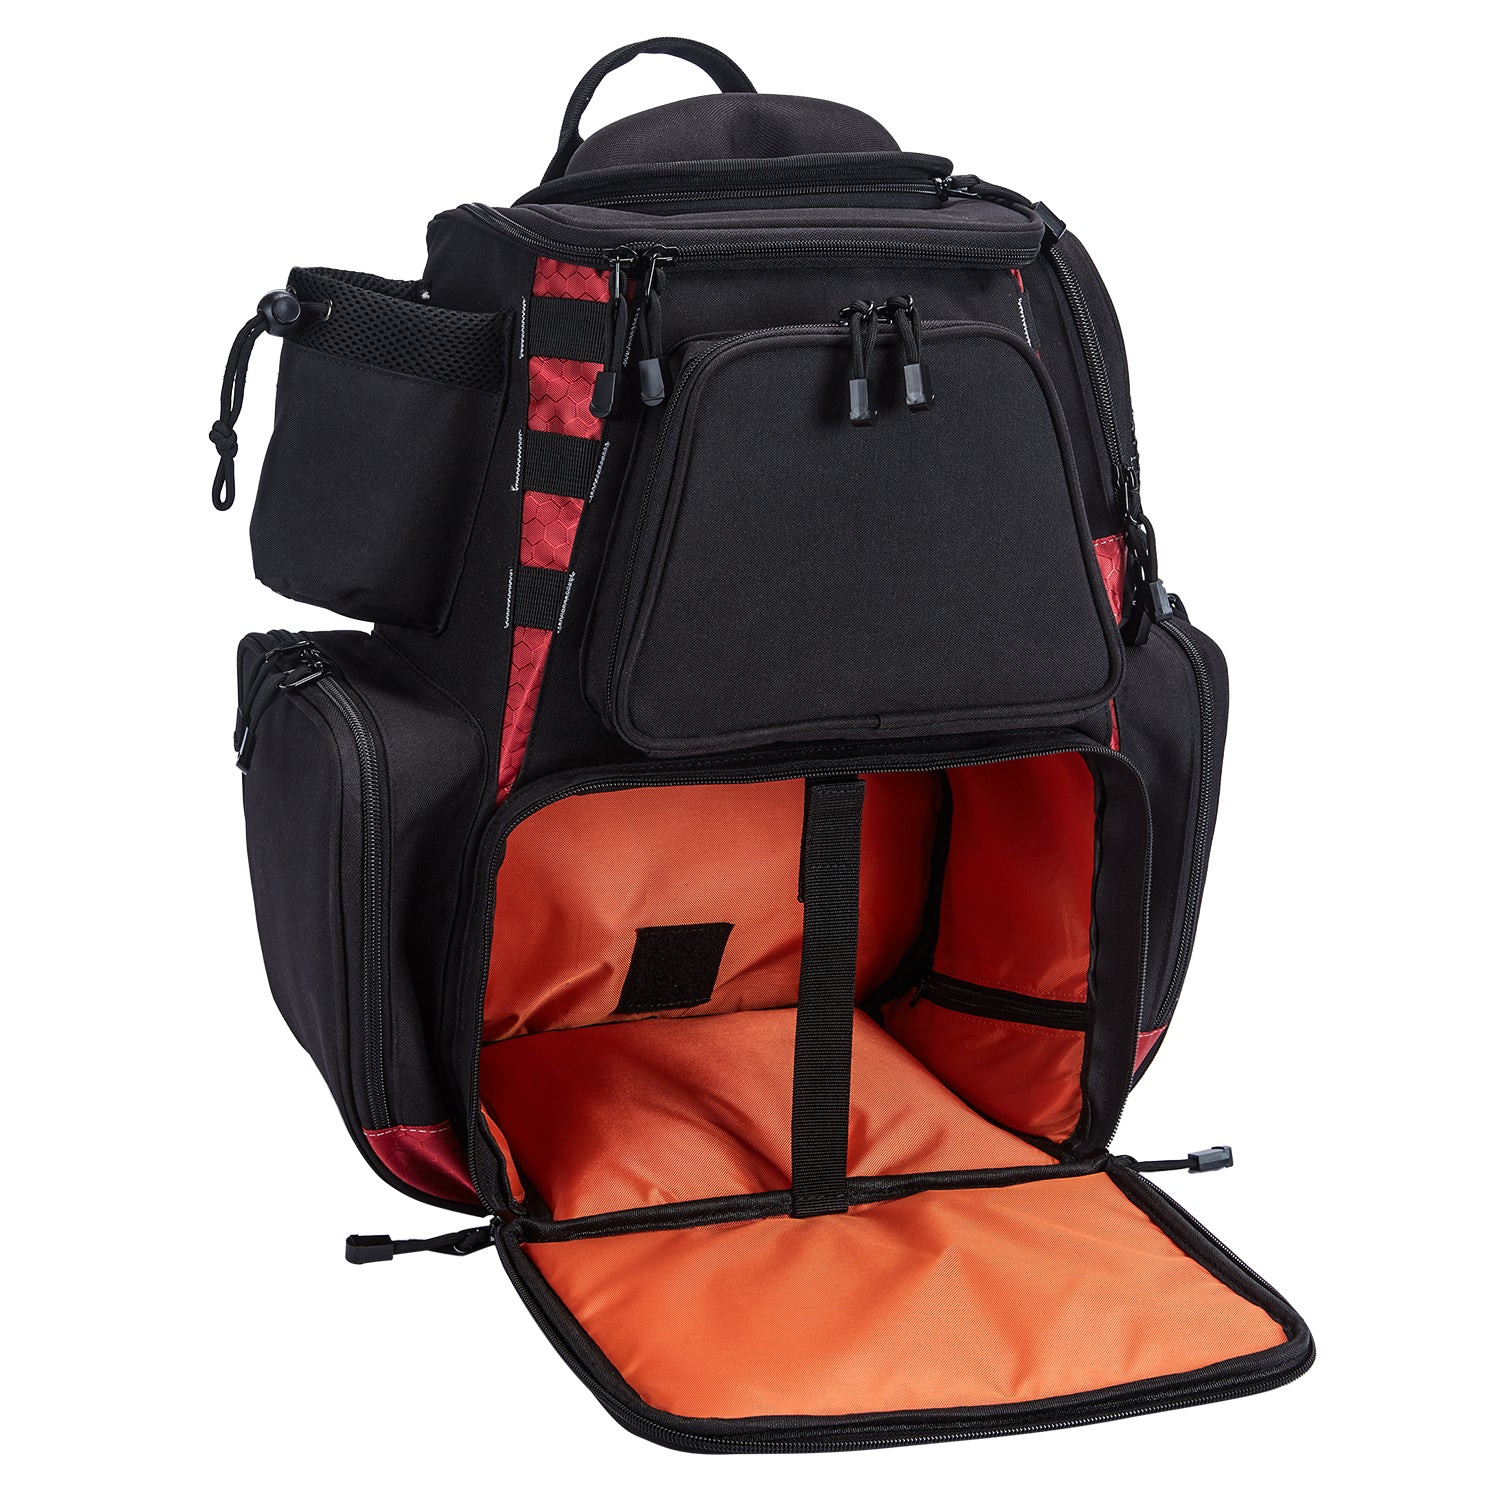 MUST HAVE!! All New Piscifun Fishing Backpack Review 